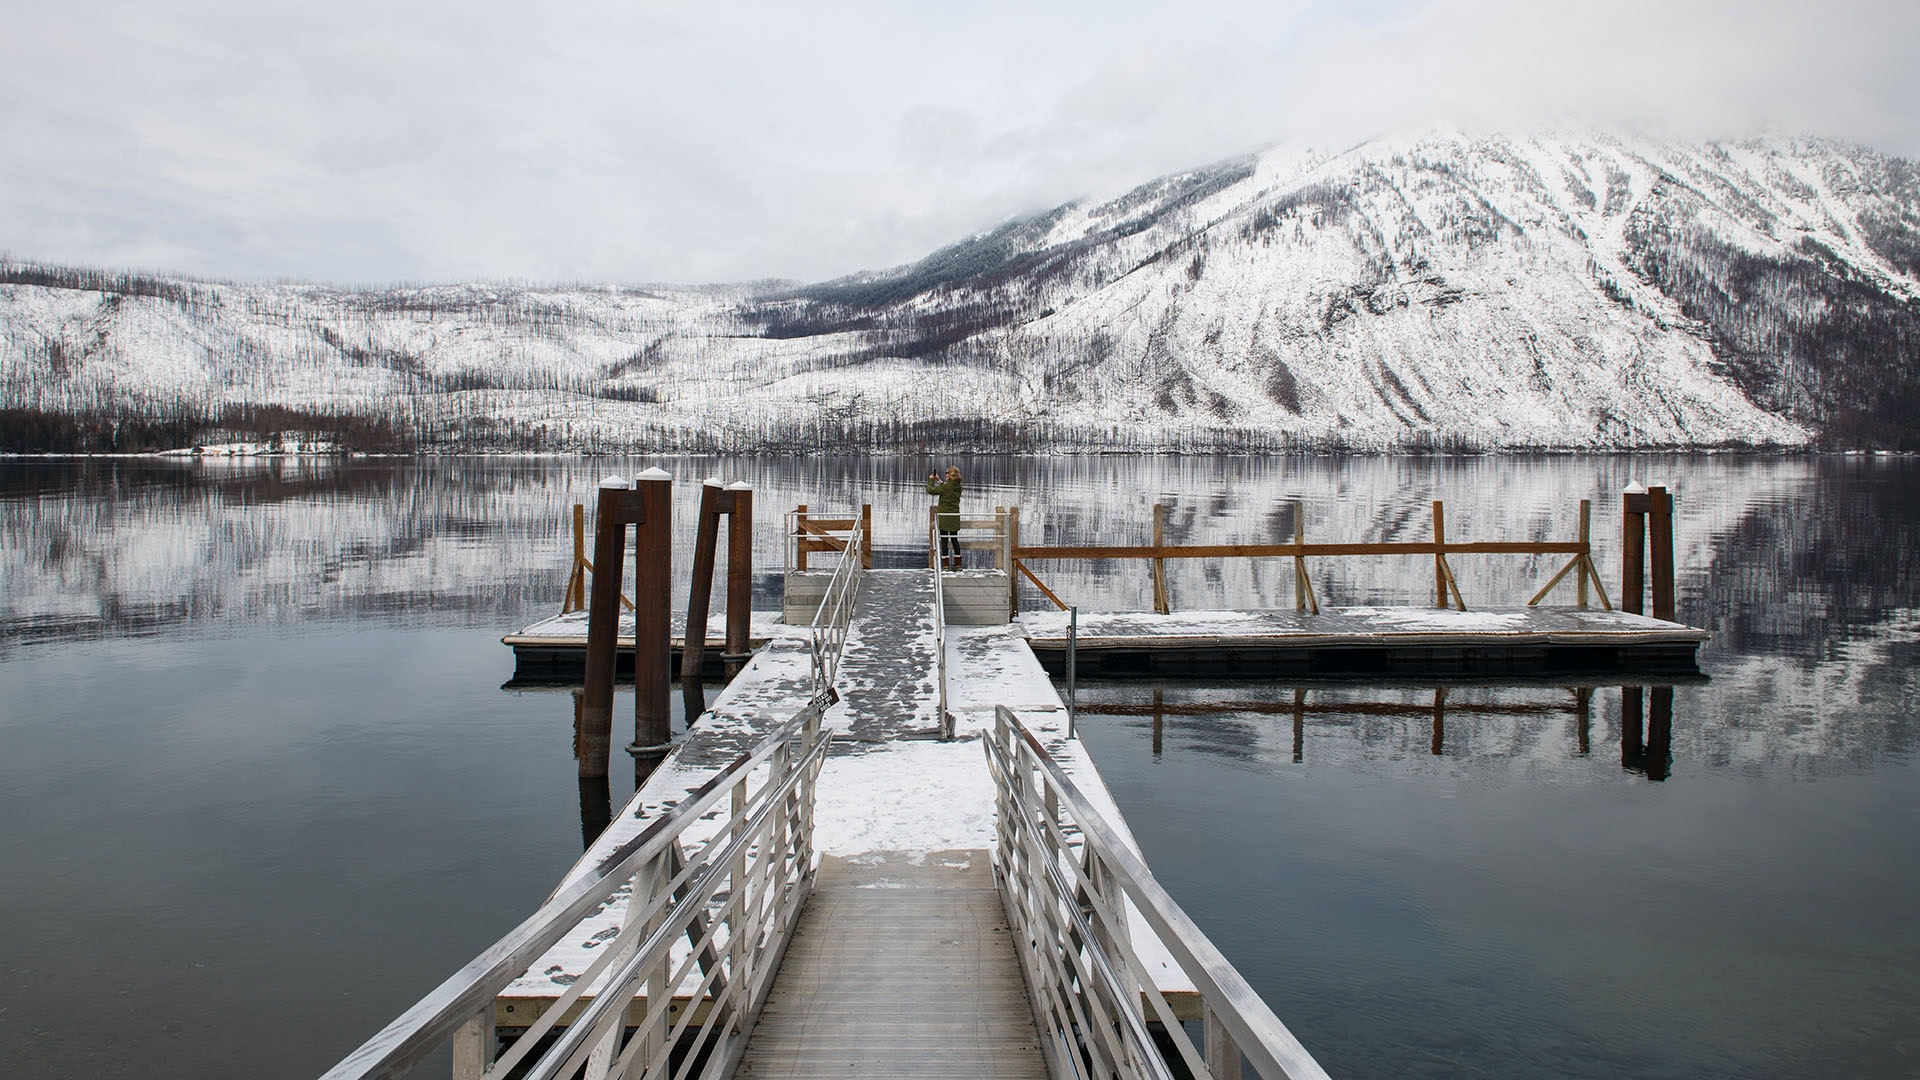 Visitors can still access the Lake McDonald pier in winter, even though the lodge is closed.